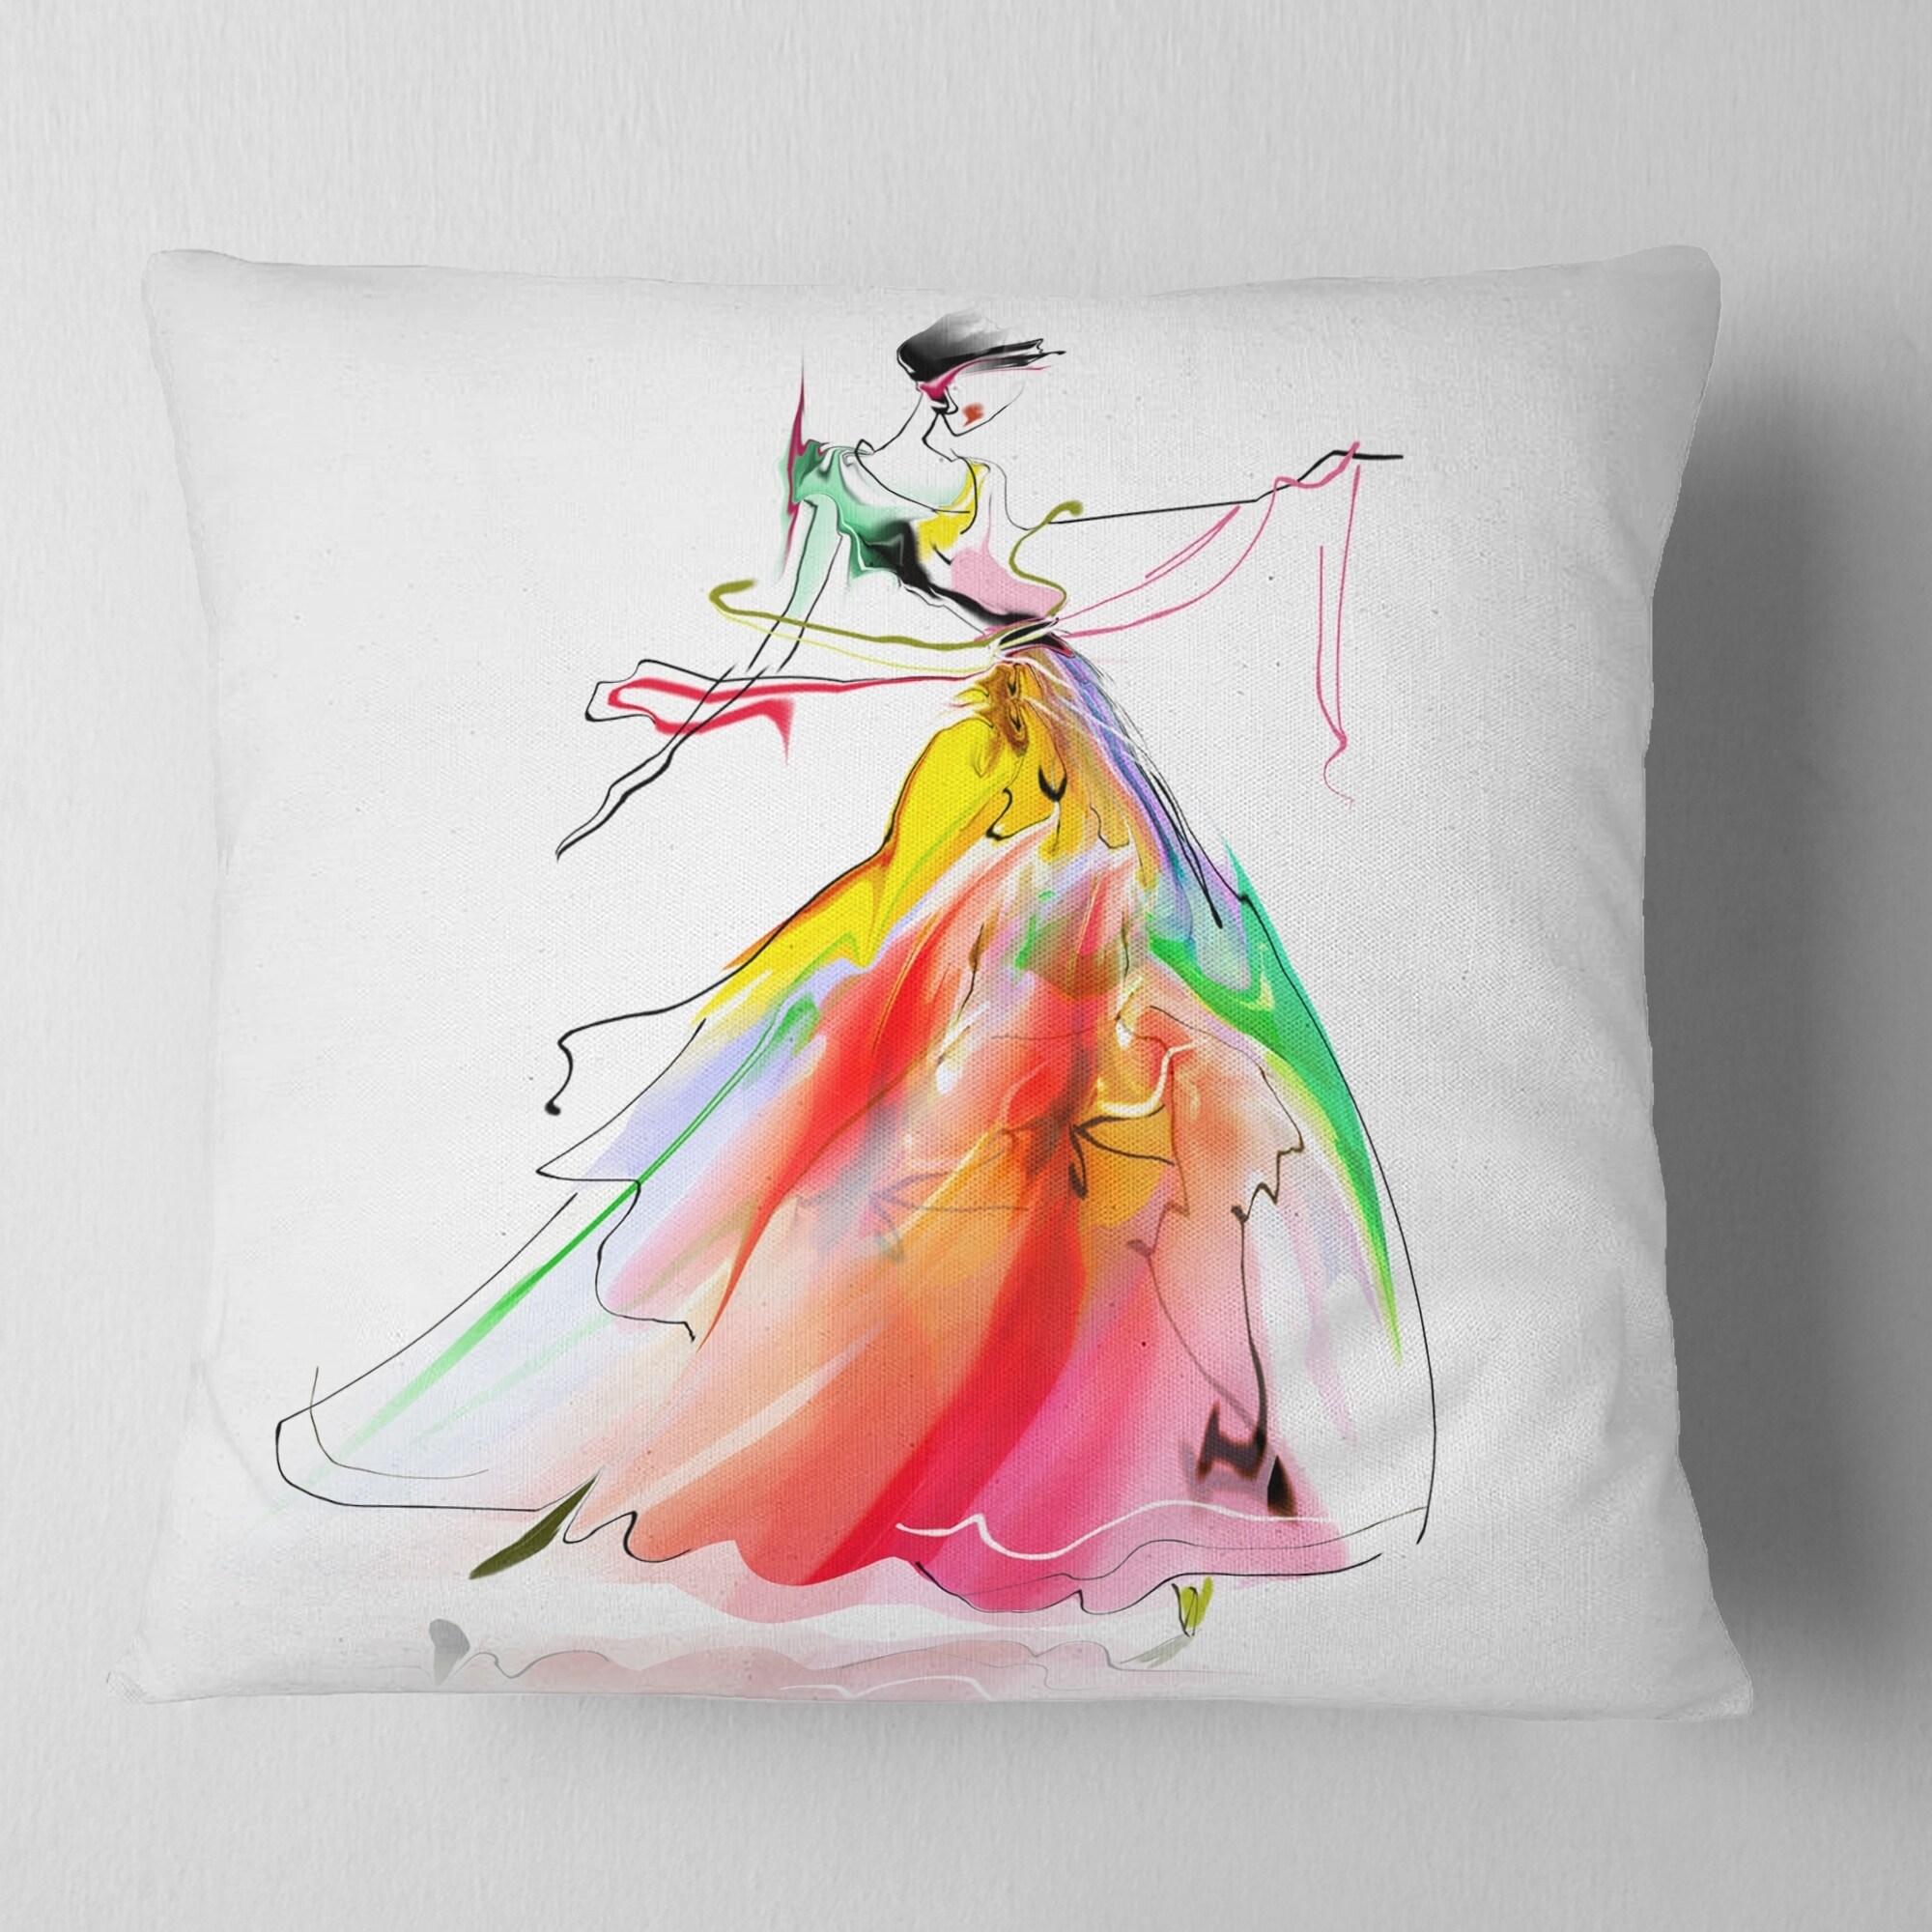 Designart Giant Tree with Woman - Abstract Throw Pillow - 18x18